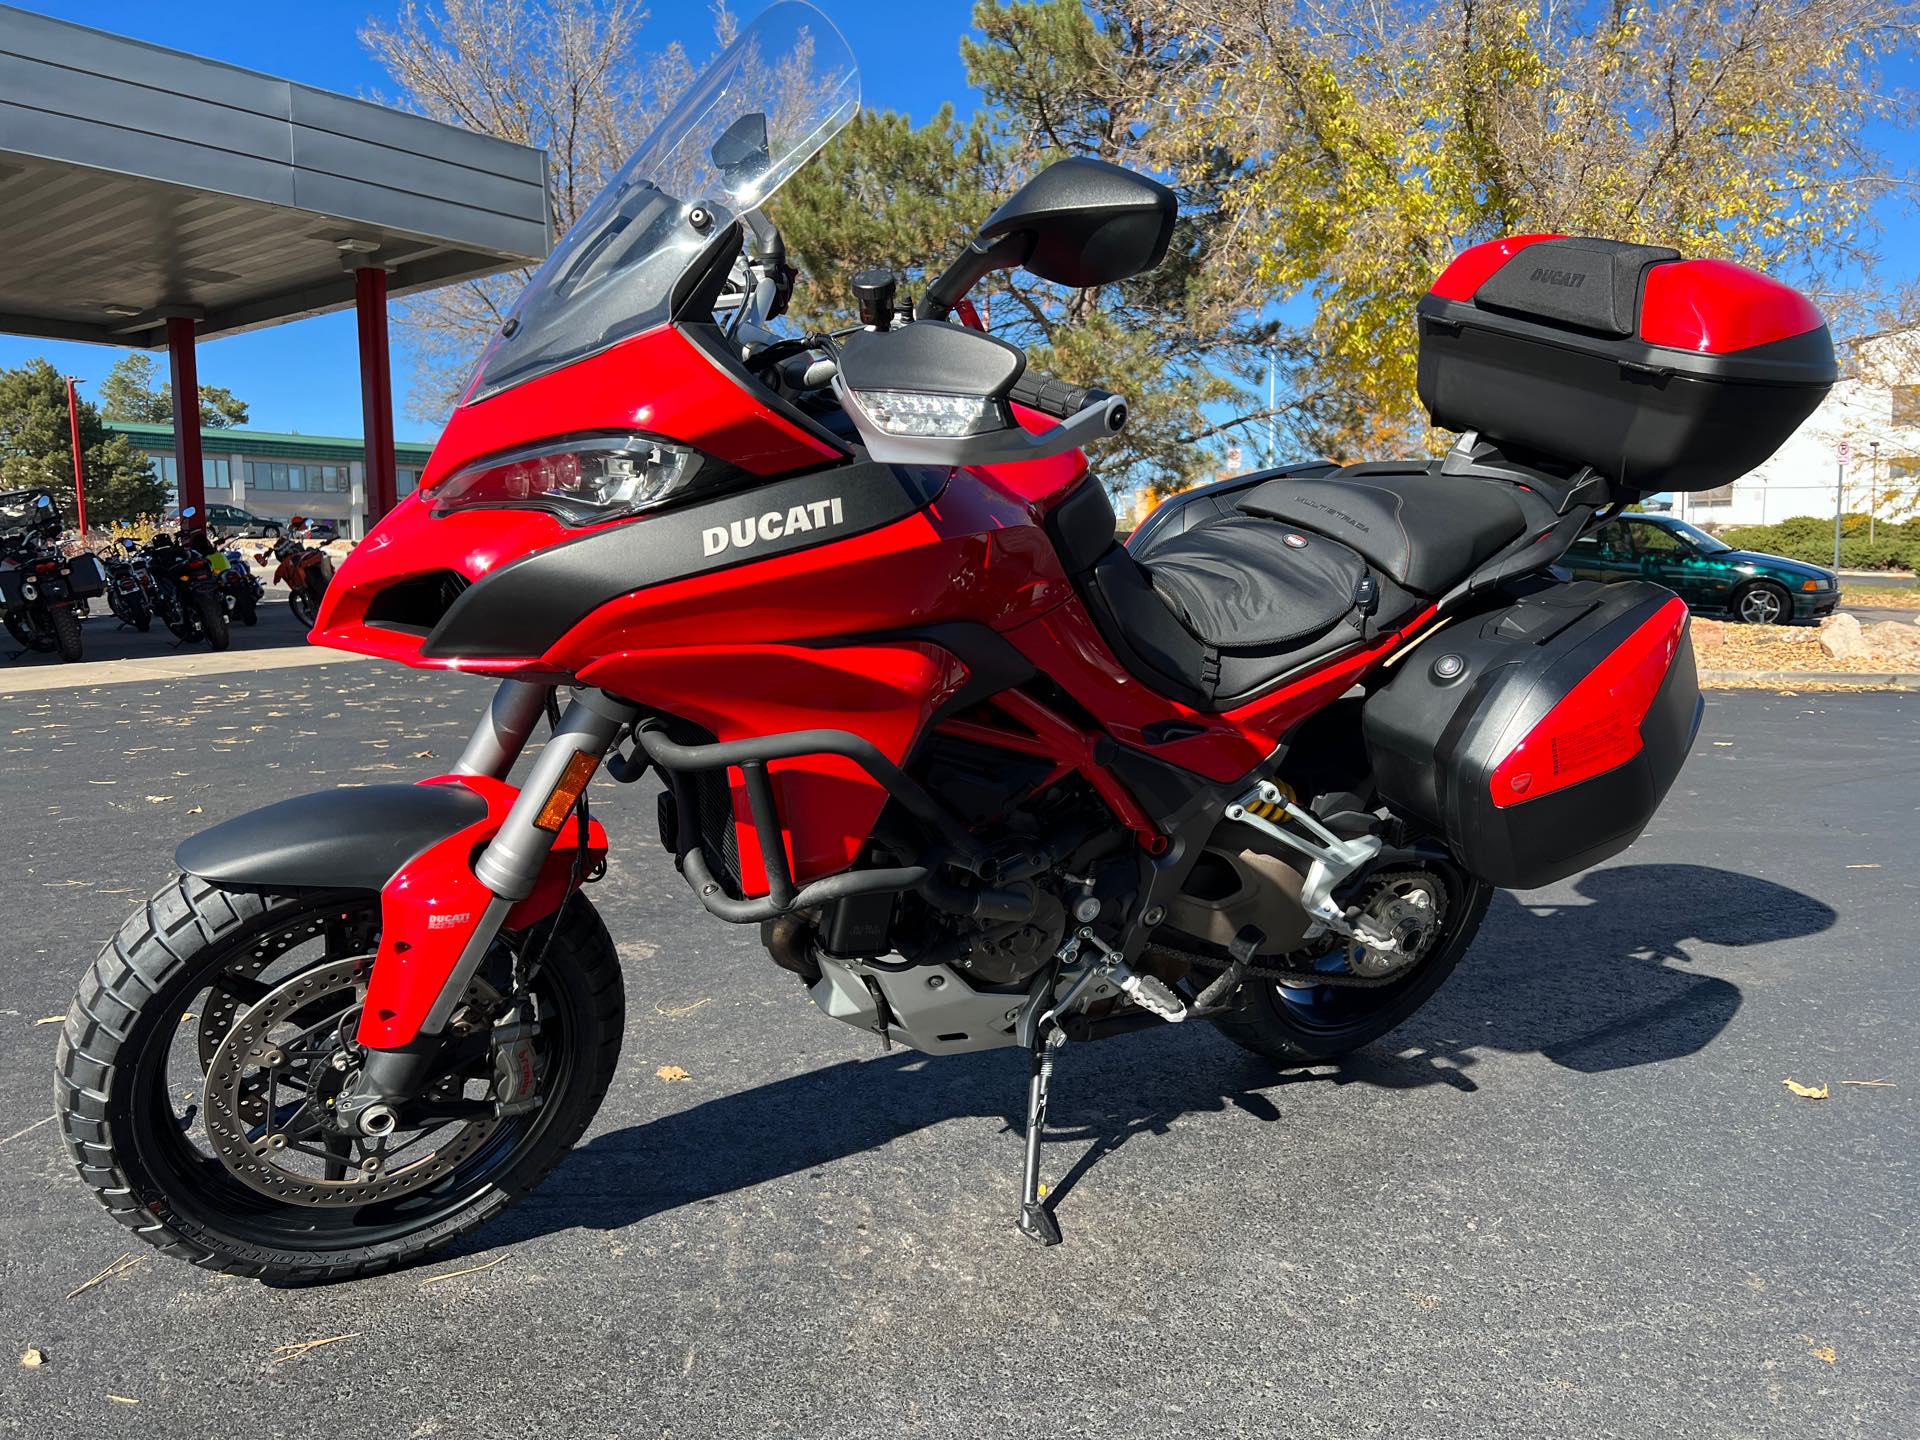 2017 Ducati Multistrada 1200 S at Aces Motorcycles - Fort Collins